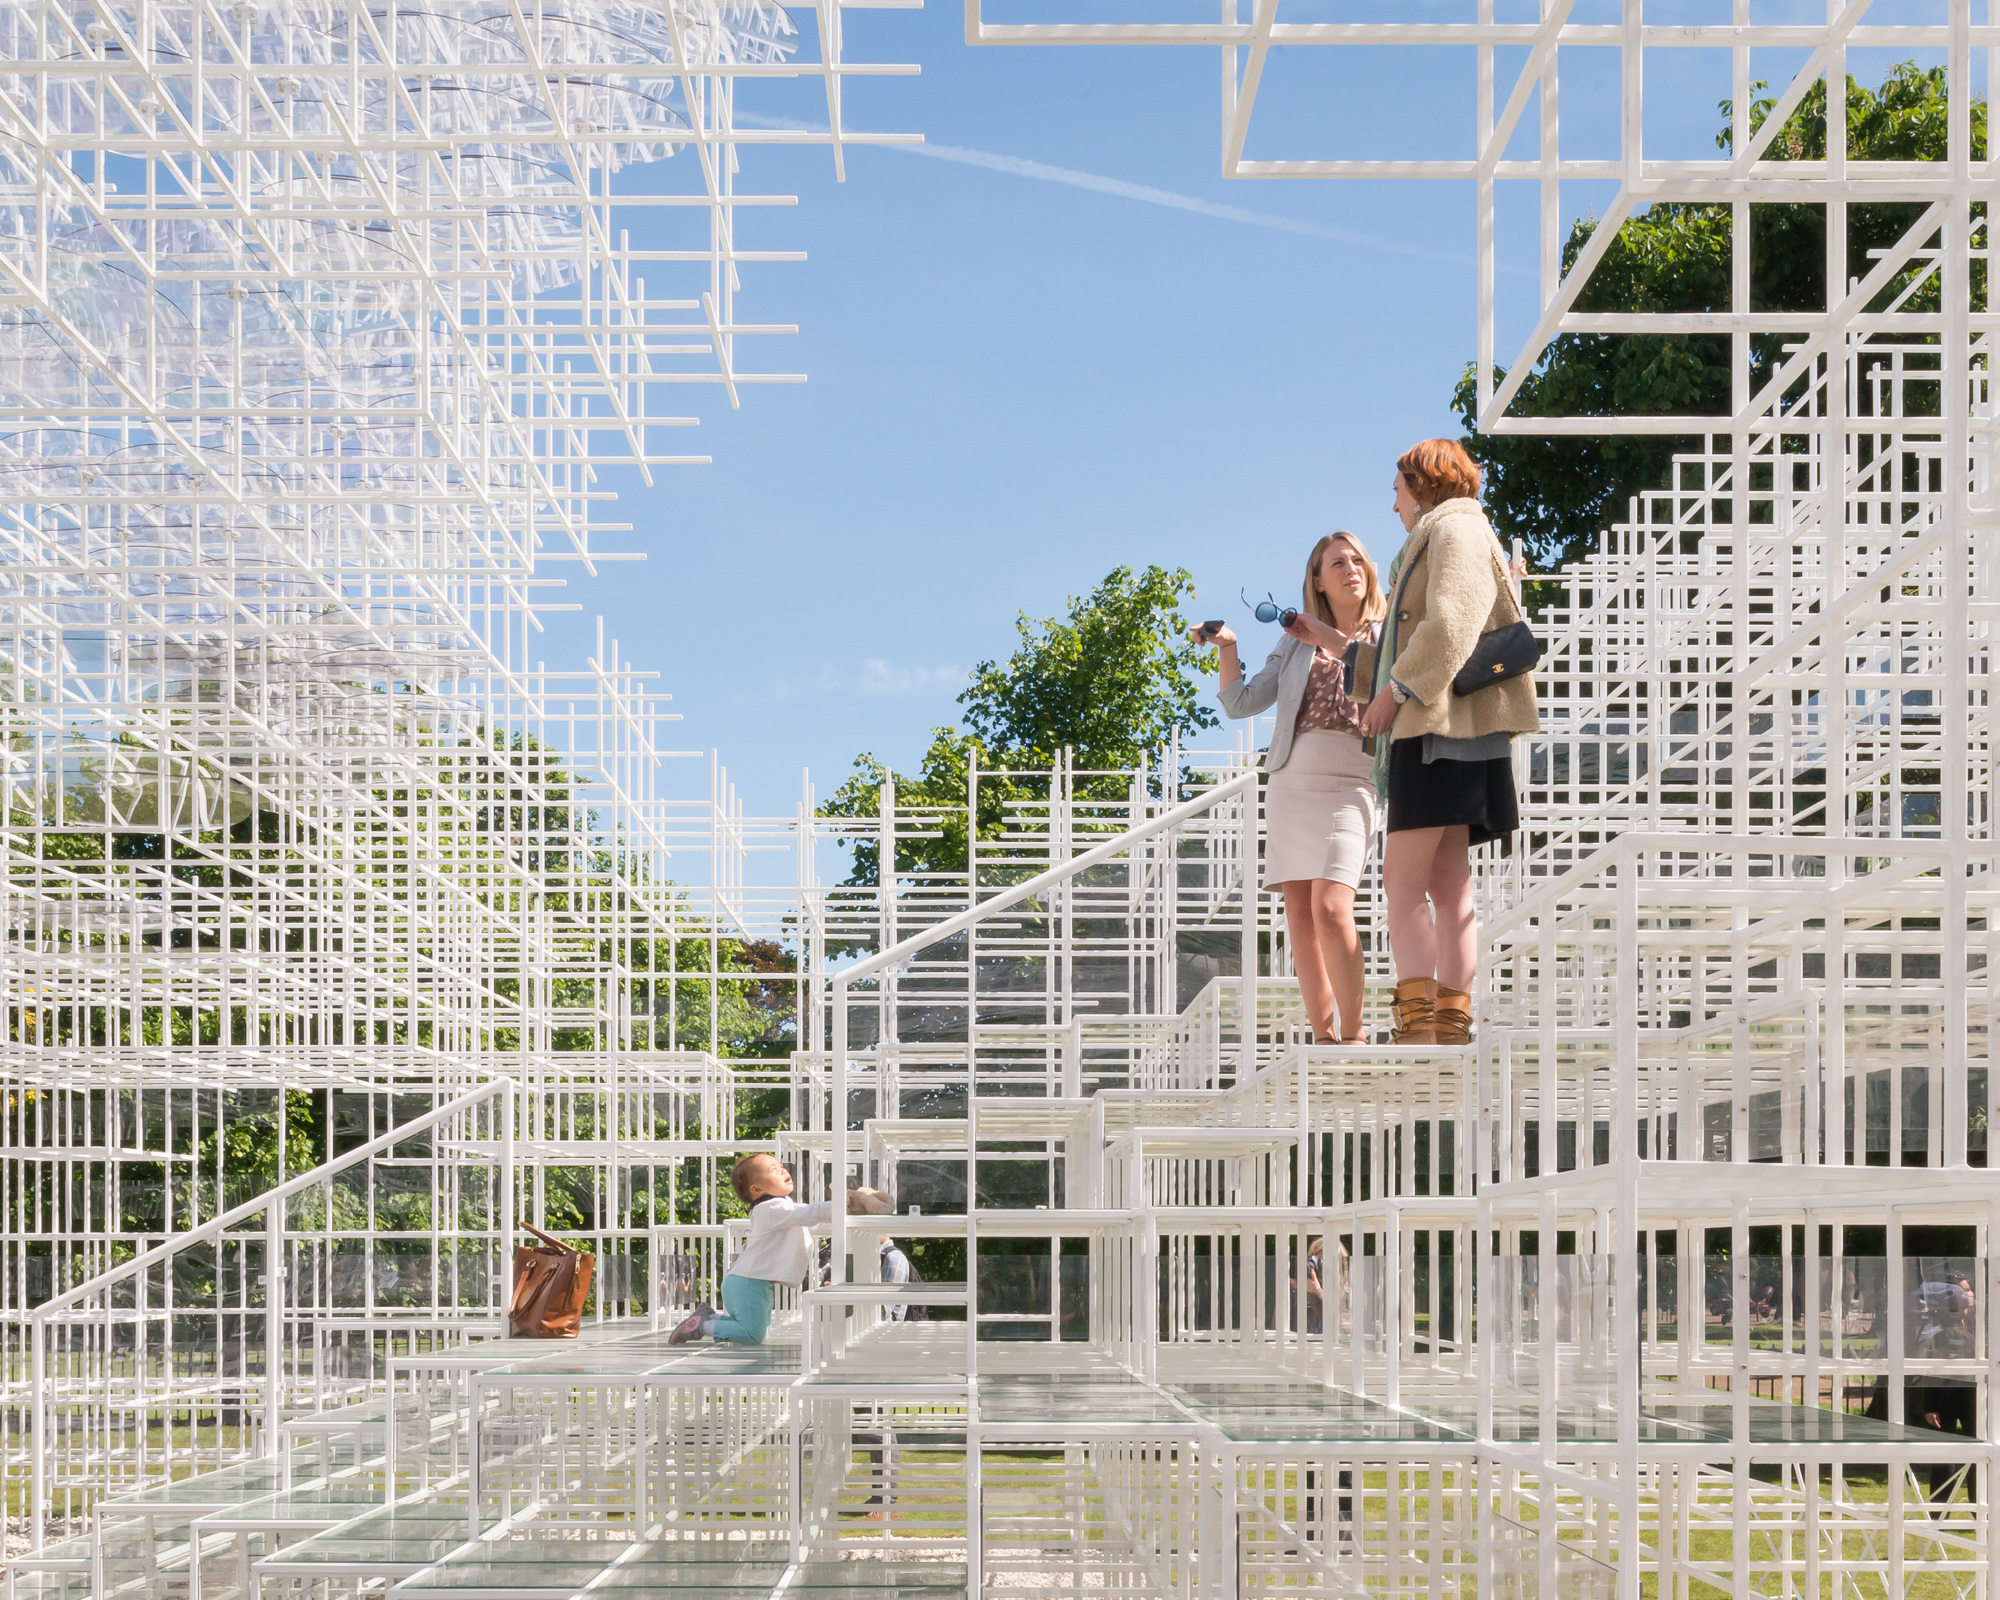 Large 3-D grid structure of thin white bars with two women standing on it talking and a baby below them climbing on it